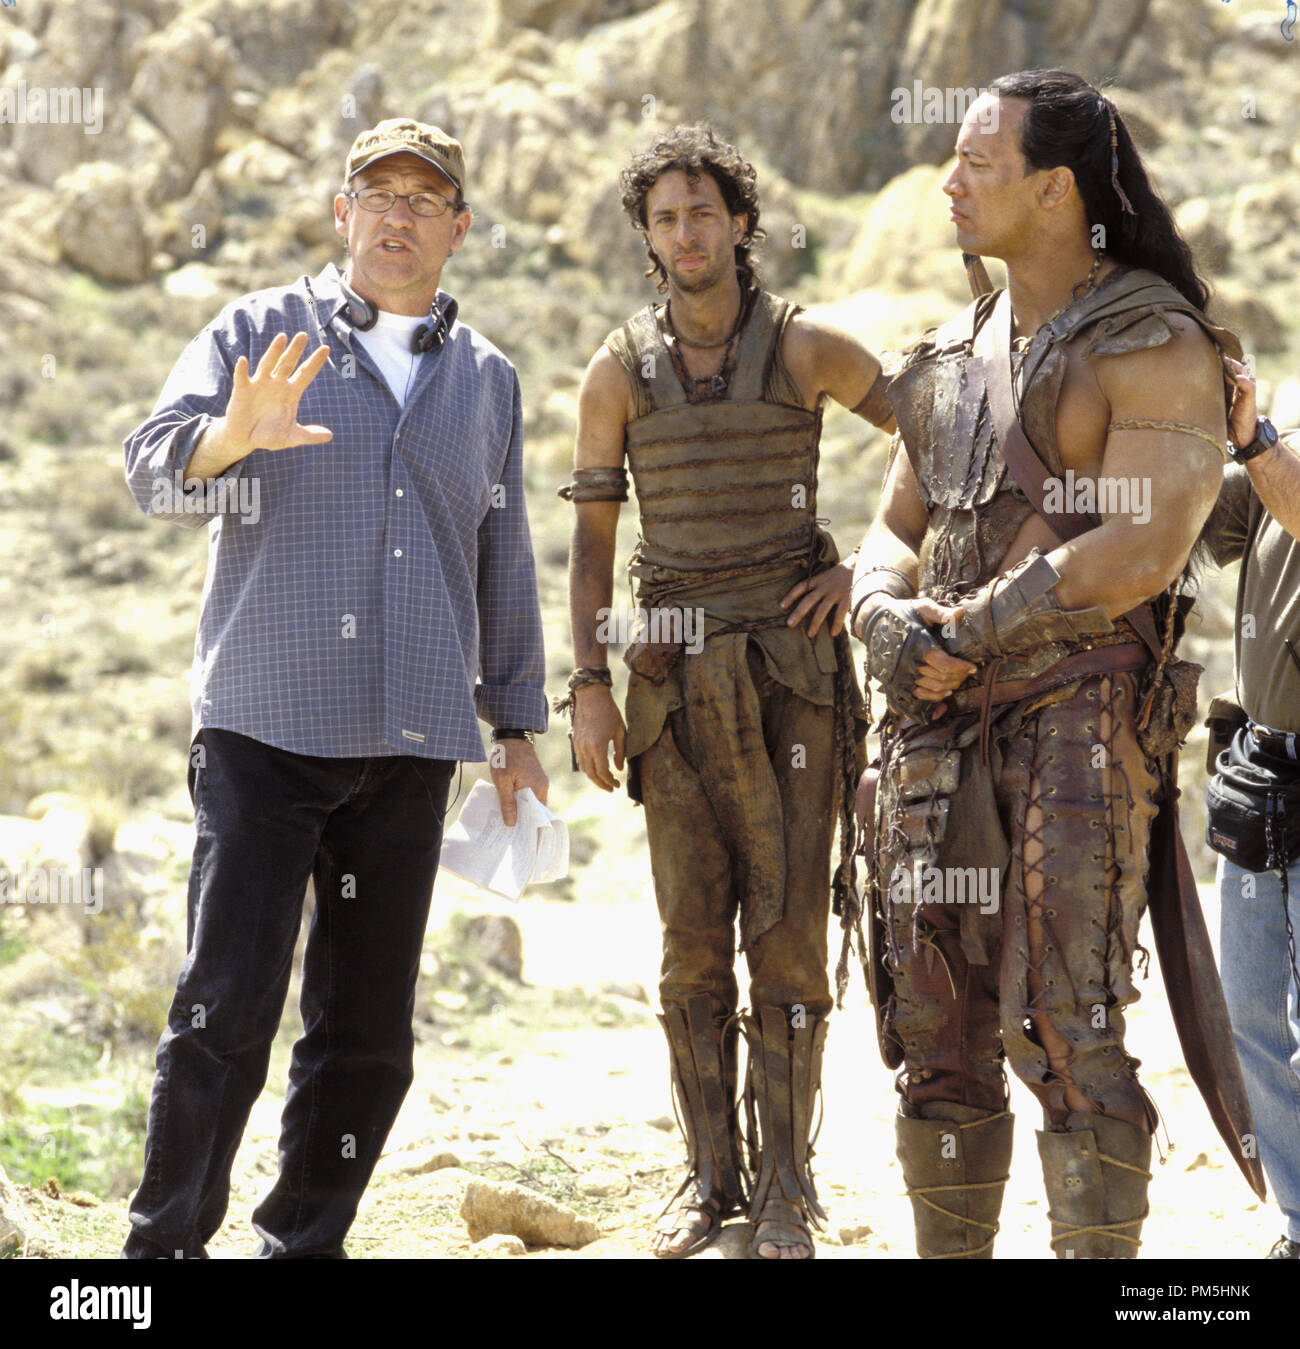 Film Still / Publicity Still from 'The Scorpion King' Director Chuck Russell, Grant Heslov, The Rock (aka Dwayne Douglas Johnson) © 2002 Universal Studios Photo Credit: Darren Michaels File Reference # 30754279THA  For Editorial Use Only -  All Rights Reserved Stock Photo